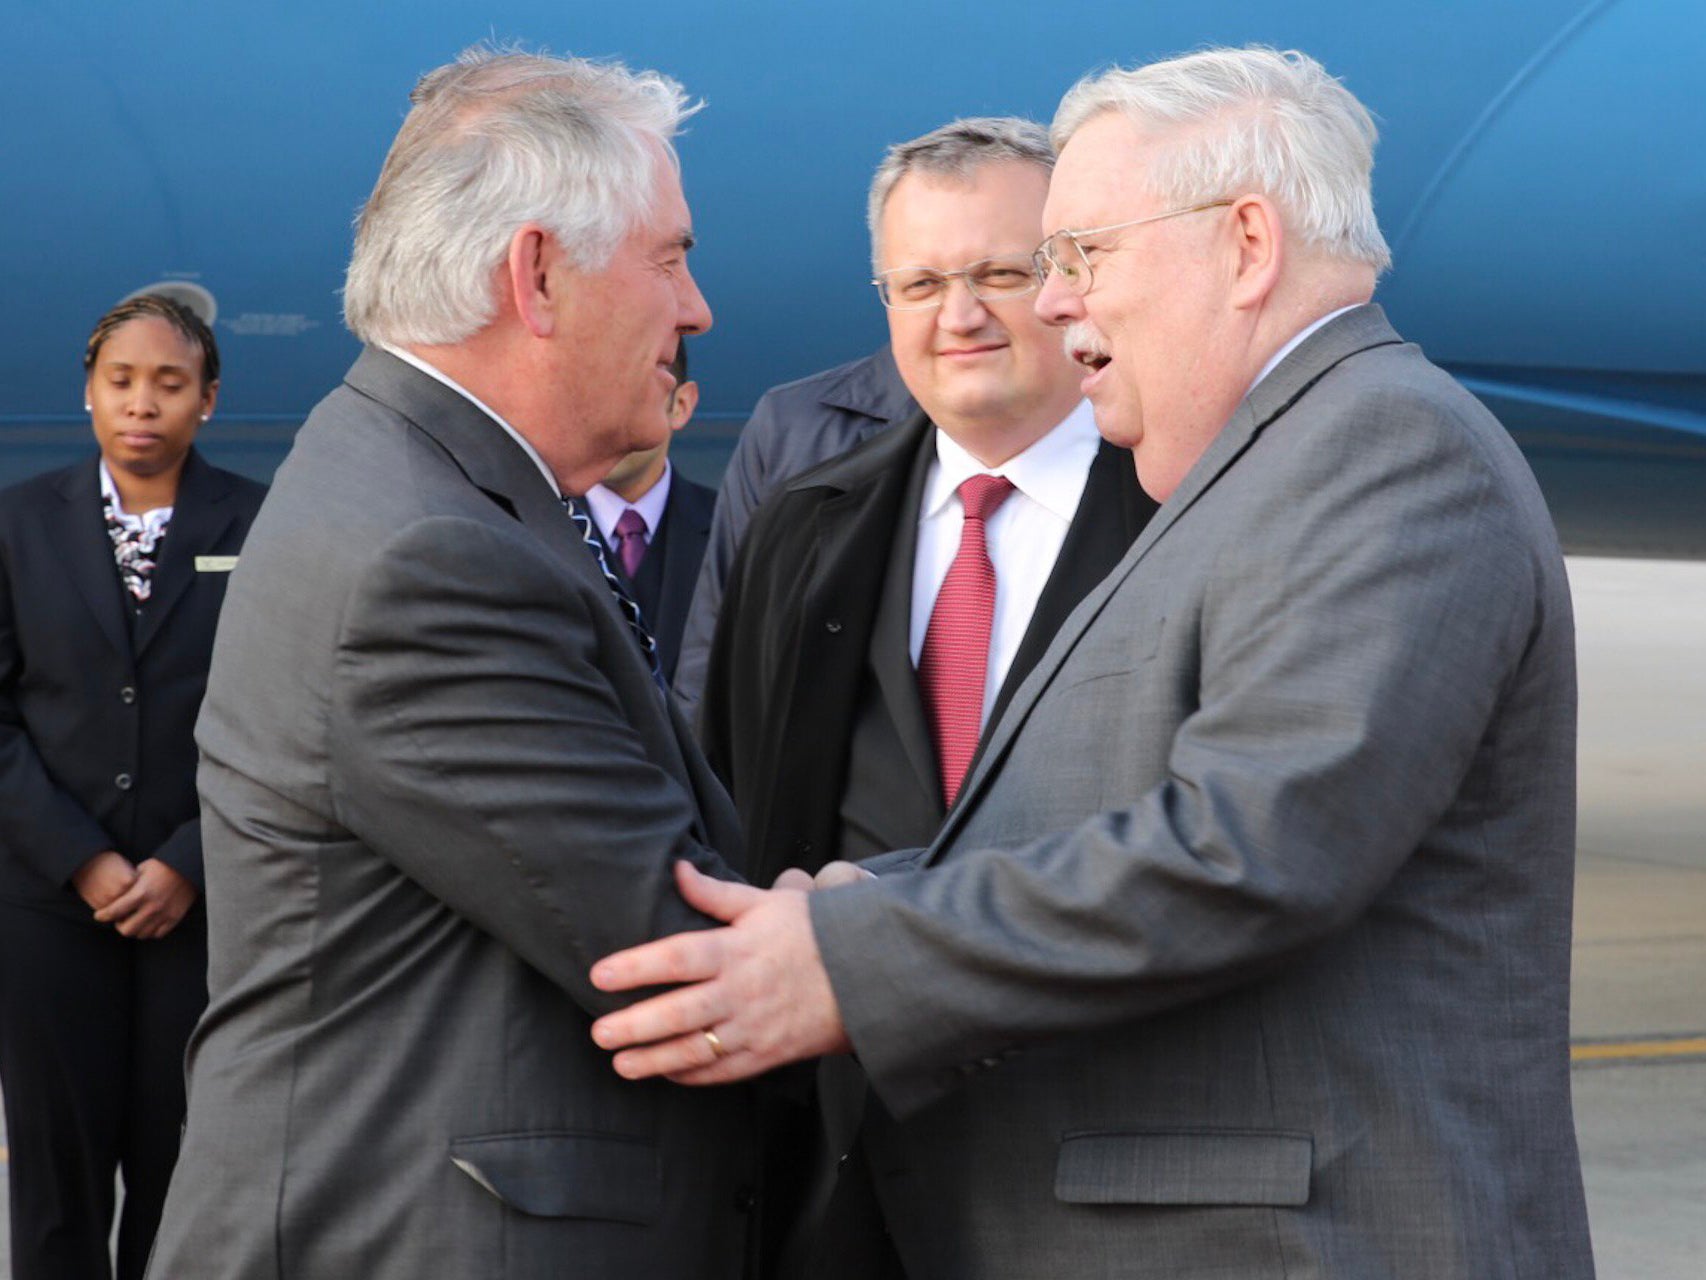 Rex Tillerson (left) is welcomed by US ambassador to Russia John Tefft upon his arrival in Moscow